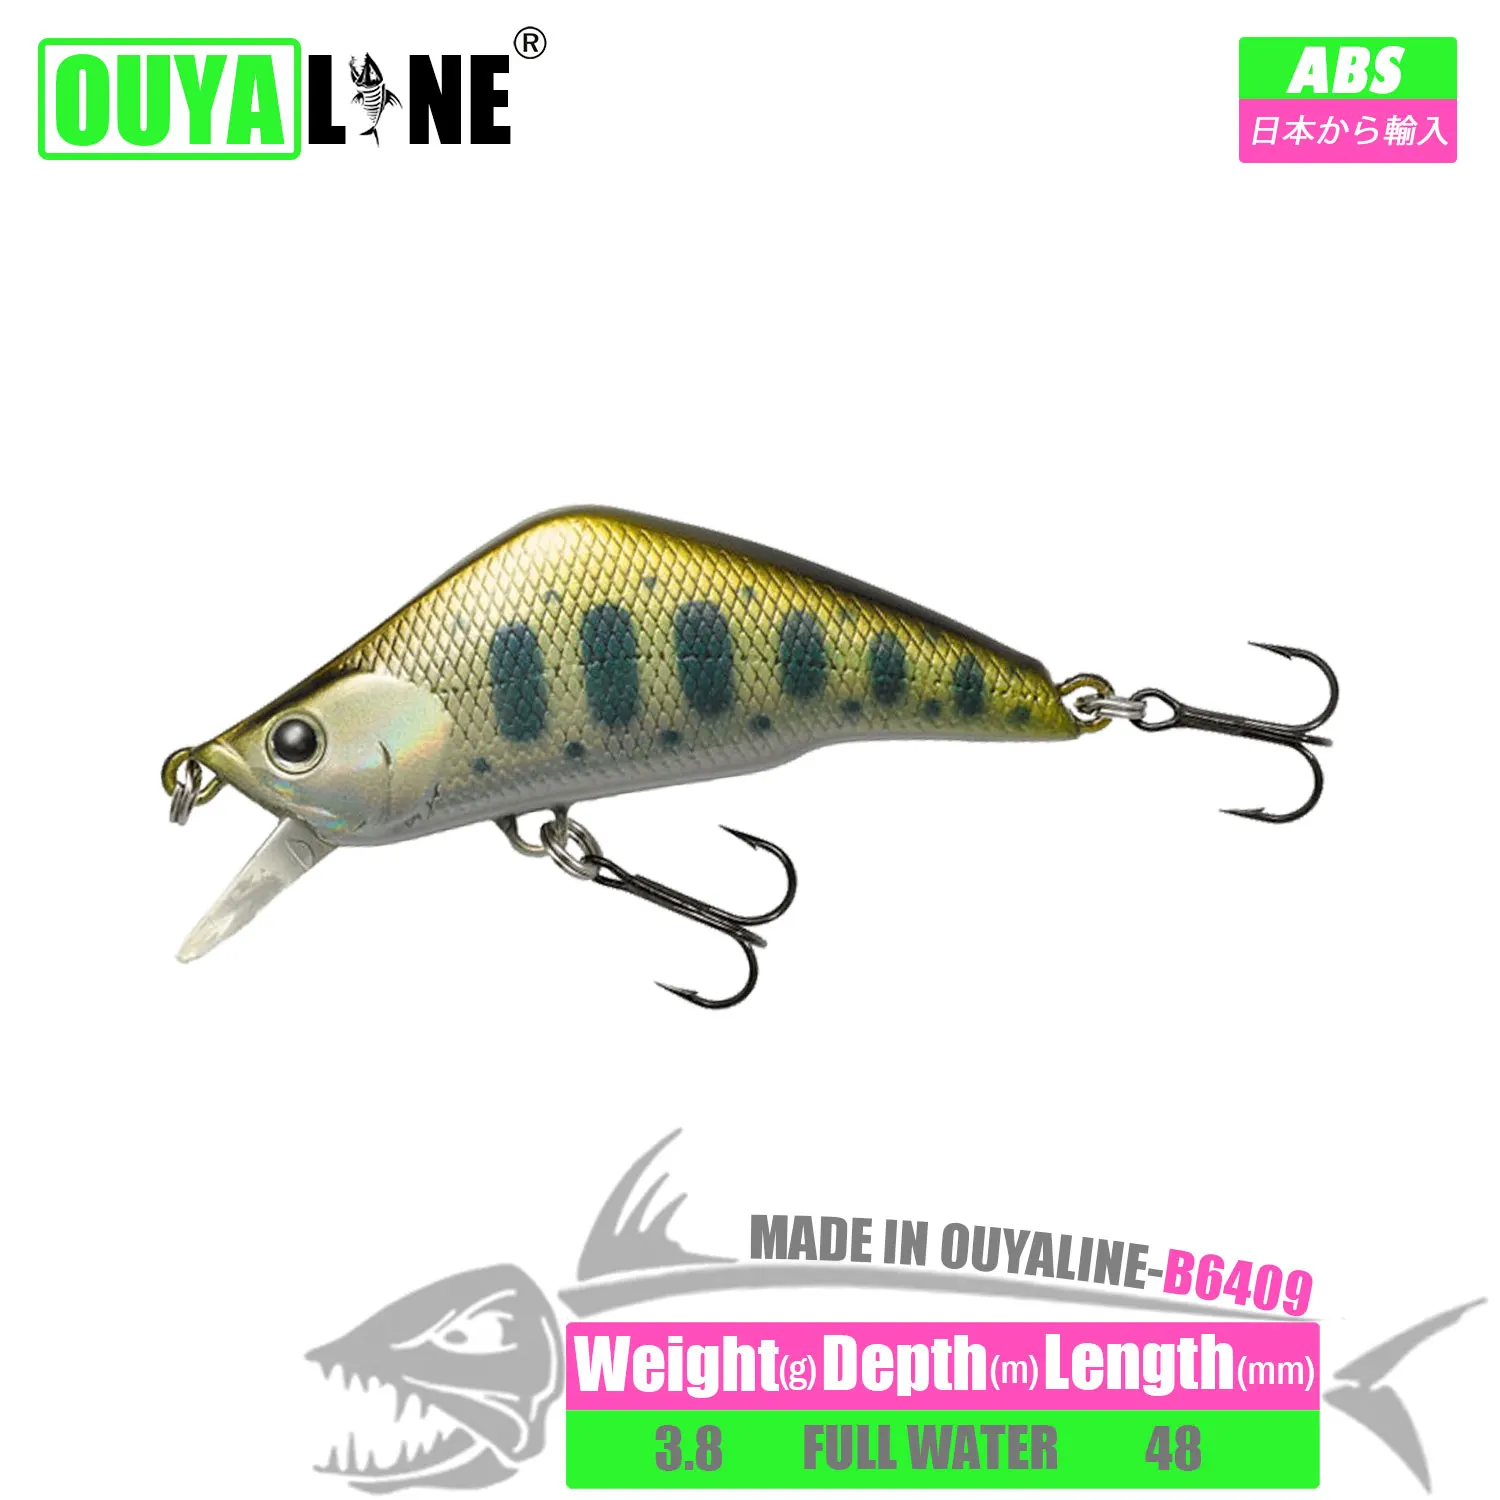 

Mini Sinking Minnow Fishing Lure 3.8g 48mm Isca Artificial Trout Plastic Hard Baits Pesca For Bass Pike Perch Fish Tackle Leurre